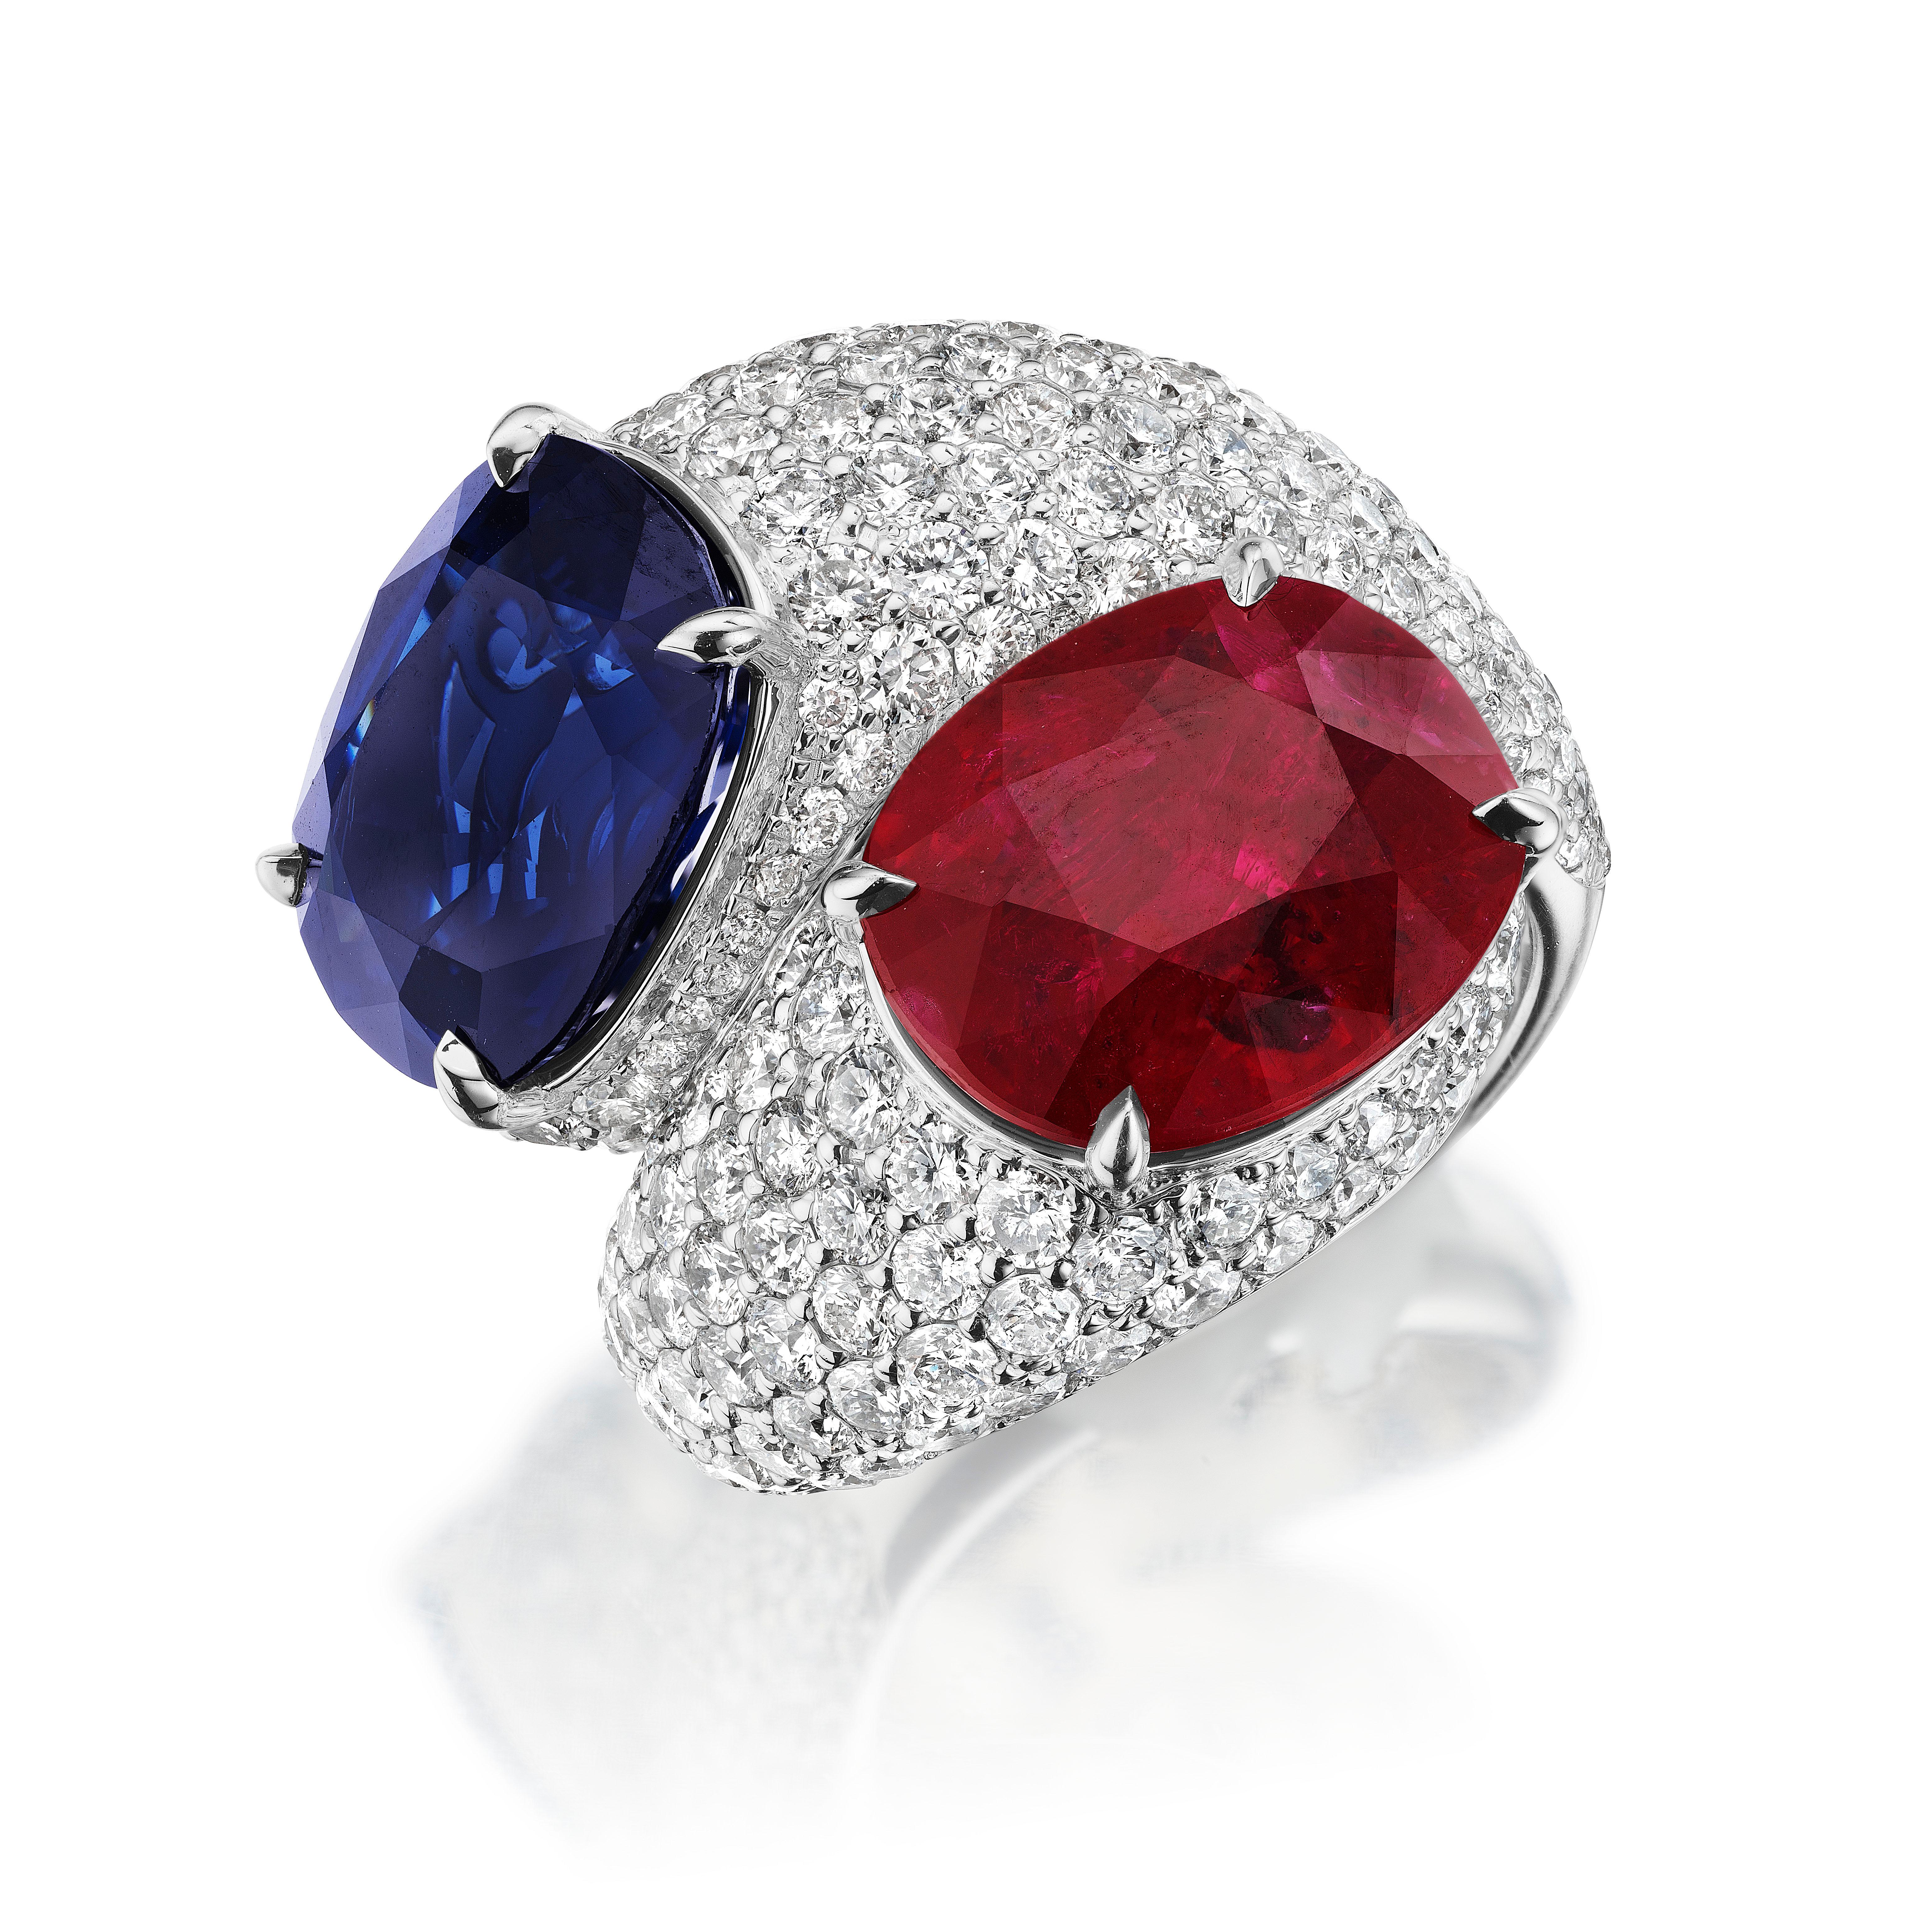 The pinnacle of excellence and design are captured in this platinum ruby & sapphire bypass ring. This handmade modern design showcases an exceptional deep vivid blue Sri Lankan 8.70 carat sapphire balanced by an 8.11 carat vivid natural Mozambique